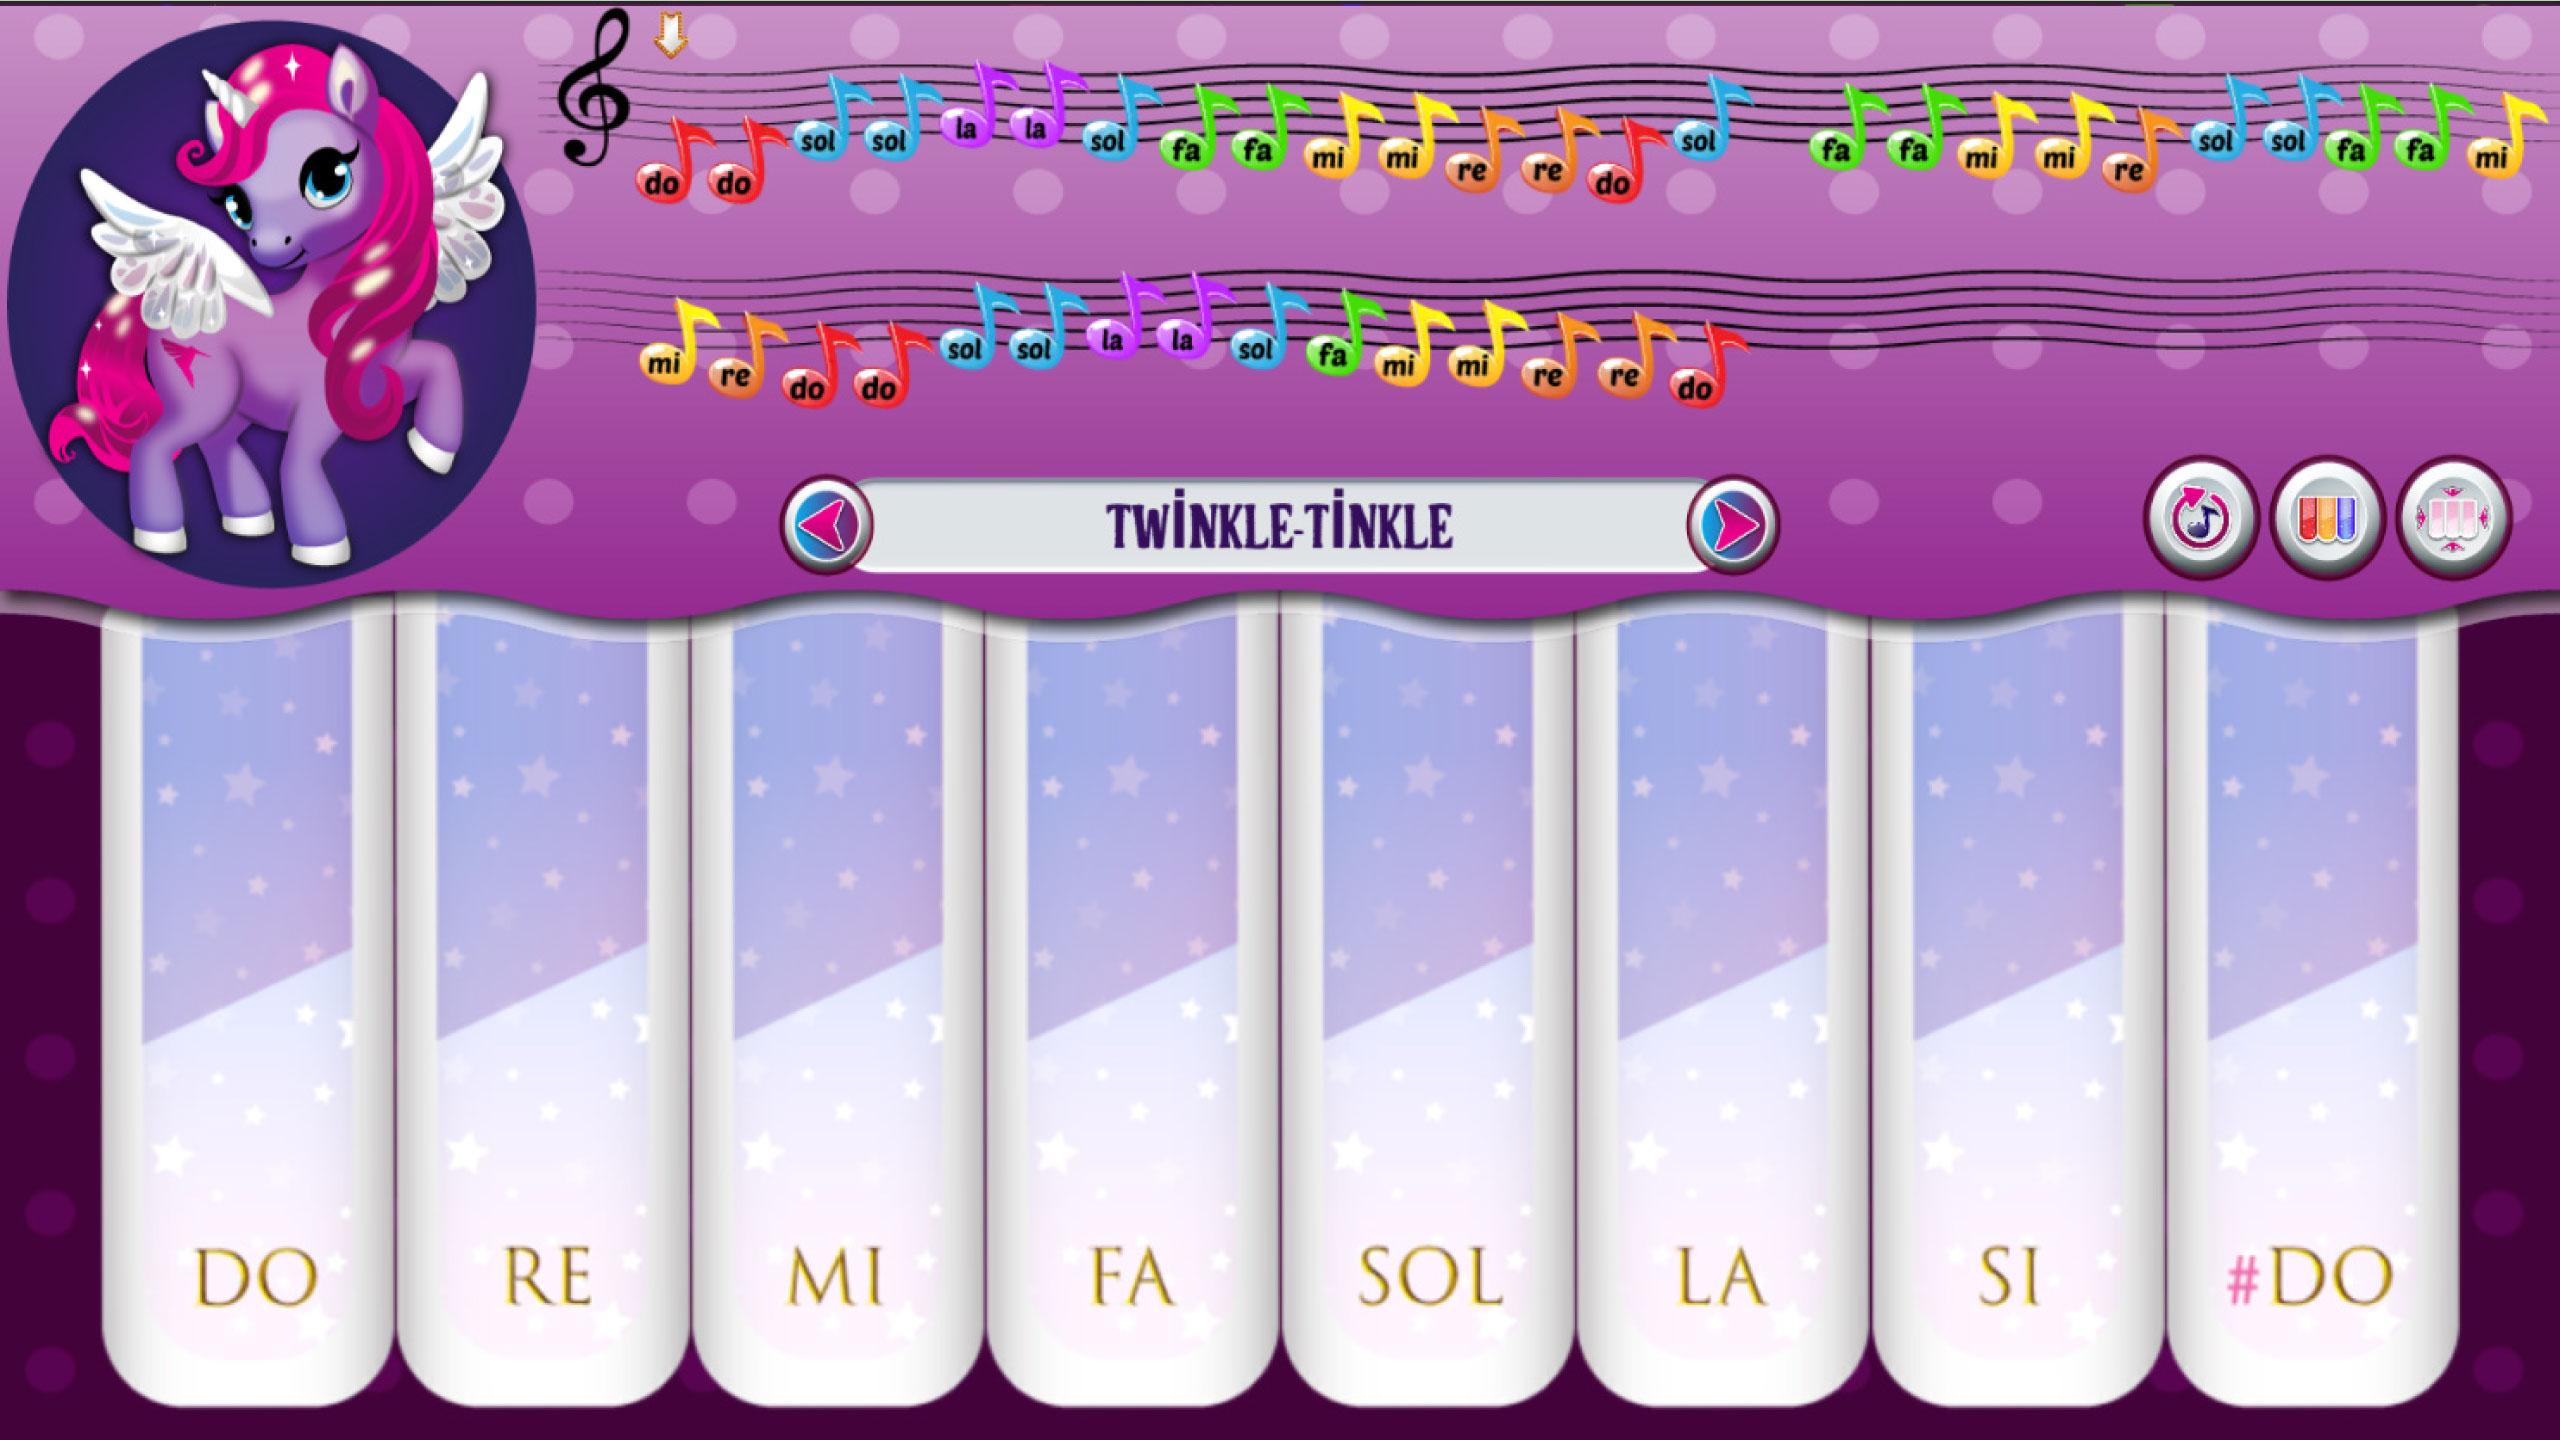 My Colorful Litle Pony Instrument - Piano 2.0 Screenshot 24